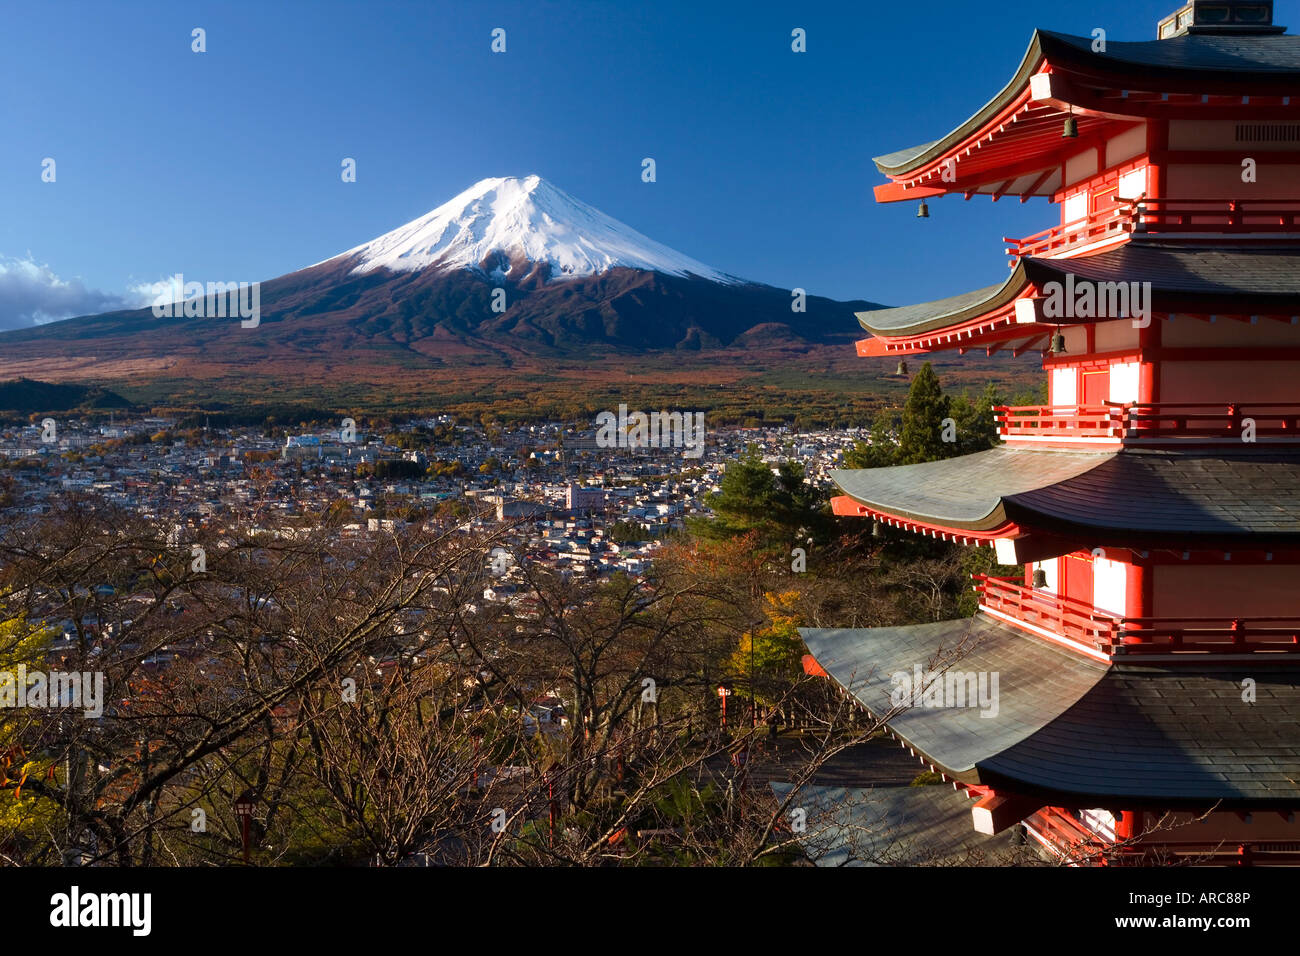 Mount Fuji capped in snow and the upper levels of a temple, Fuji-Hakone-Izu National Park, Chubu, Central Honshu, Japan, Asia Stock Photo